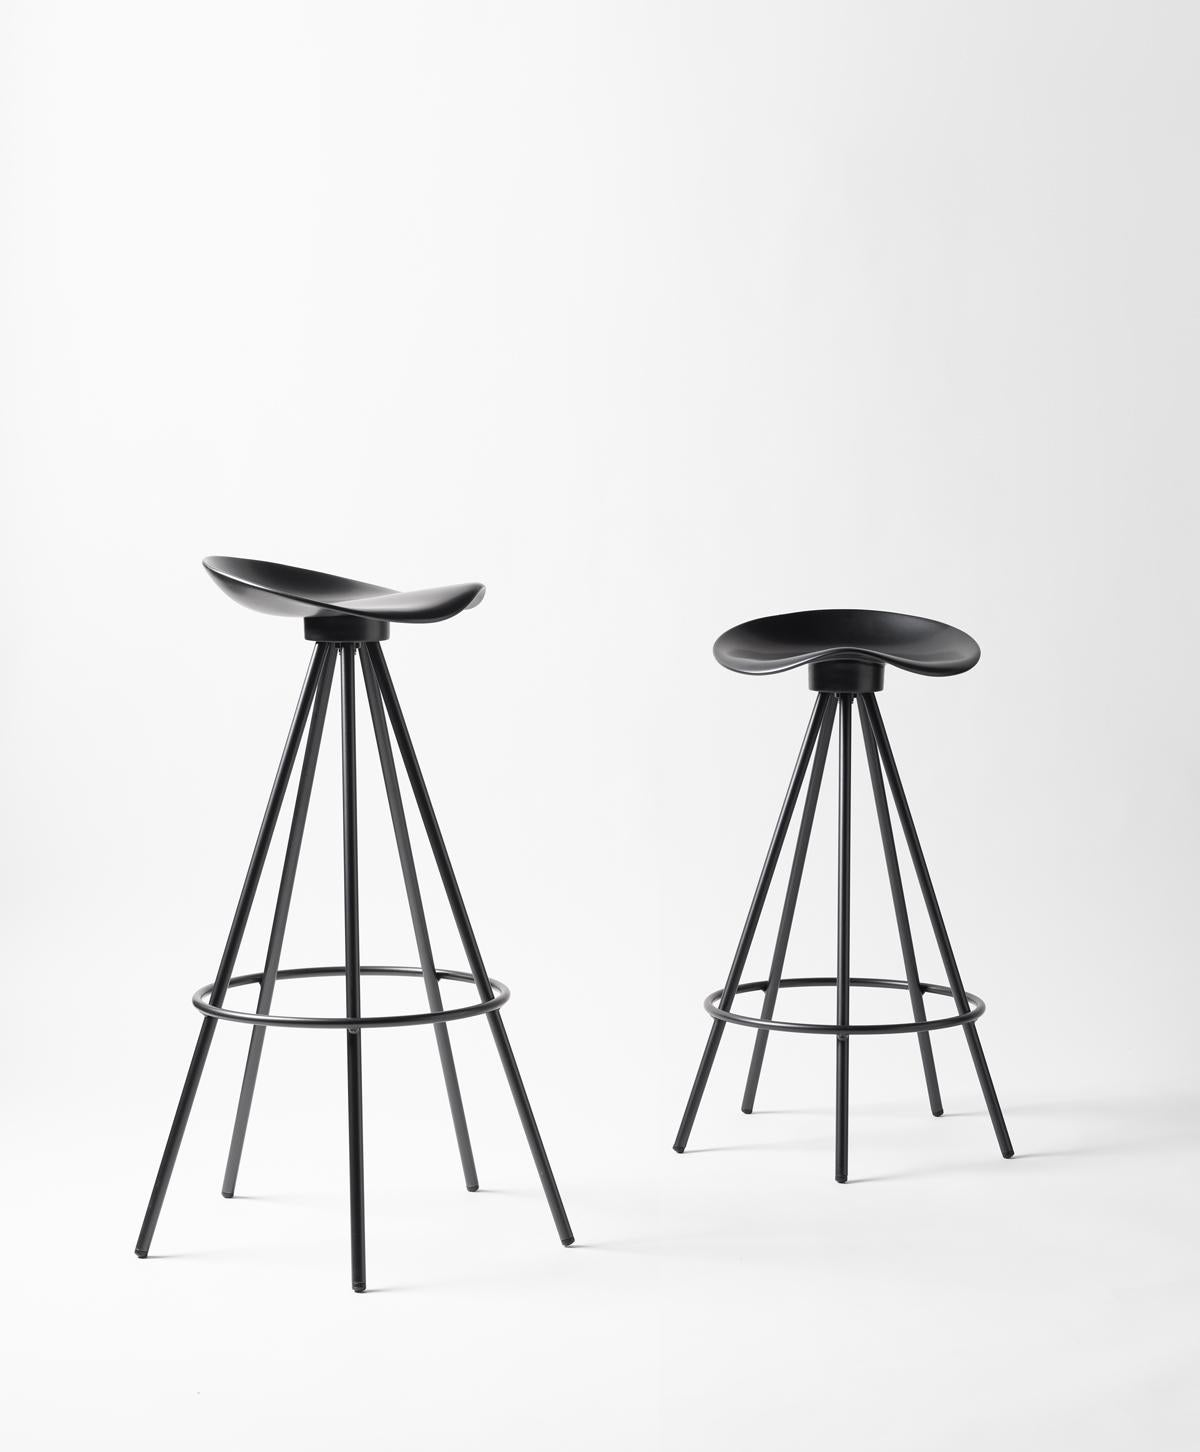 The Jamaica Stool is Spanish classic, and one of the best designed stools in history. Designed in 1991 by interior designer Pepe Cortes, the stool remains as modern as ever. Its materials and durabiluty make the chair idea for a variety of settings.